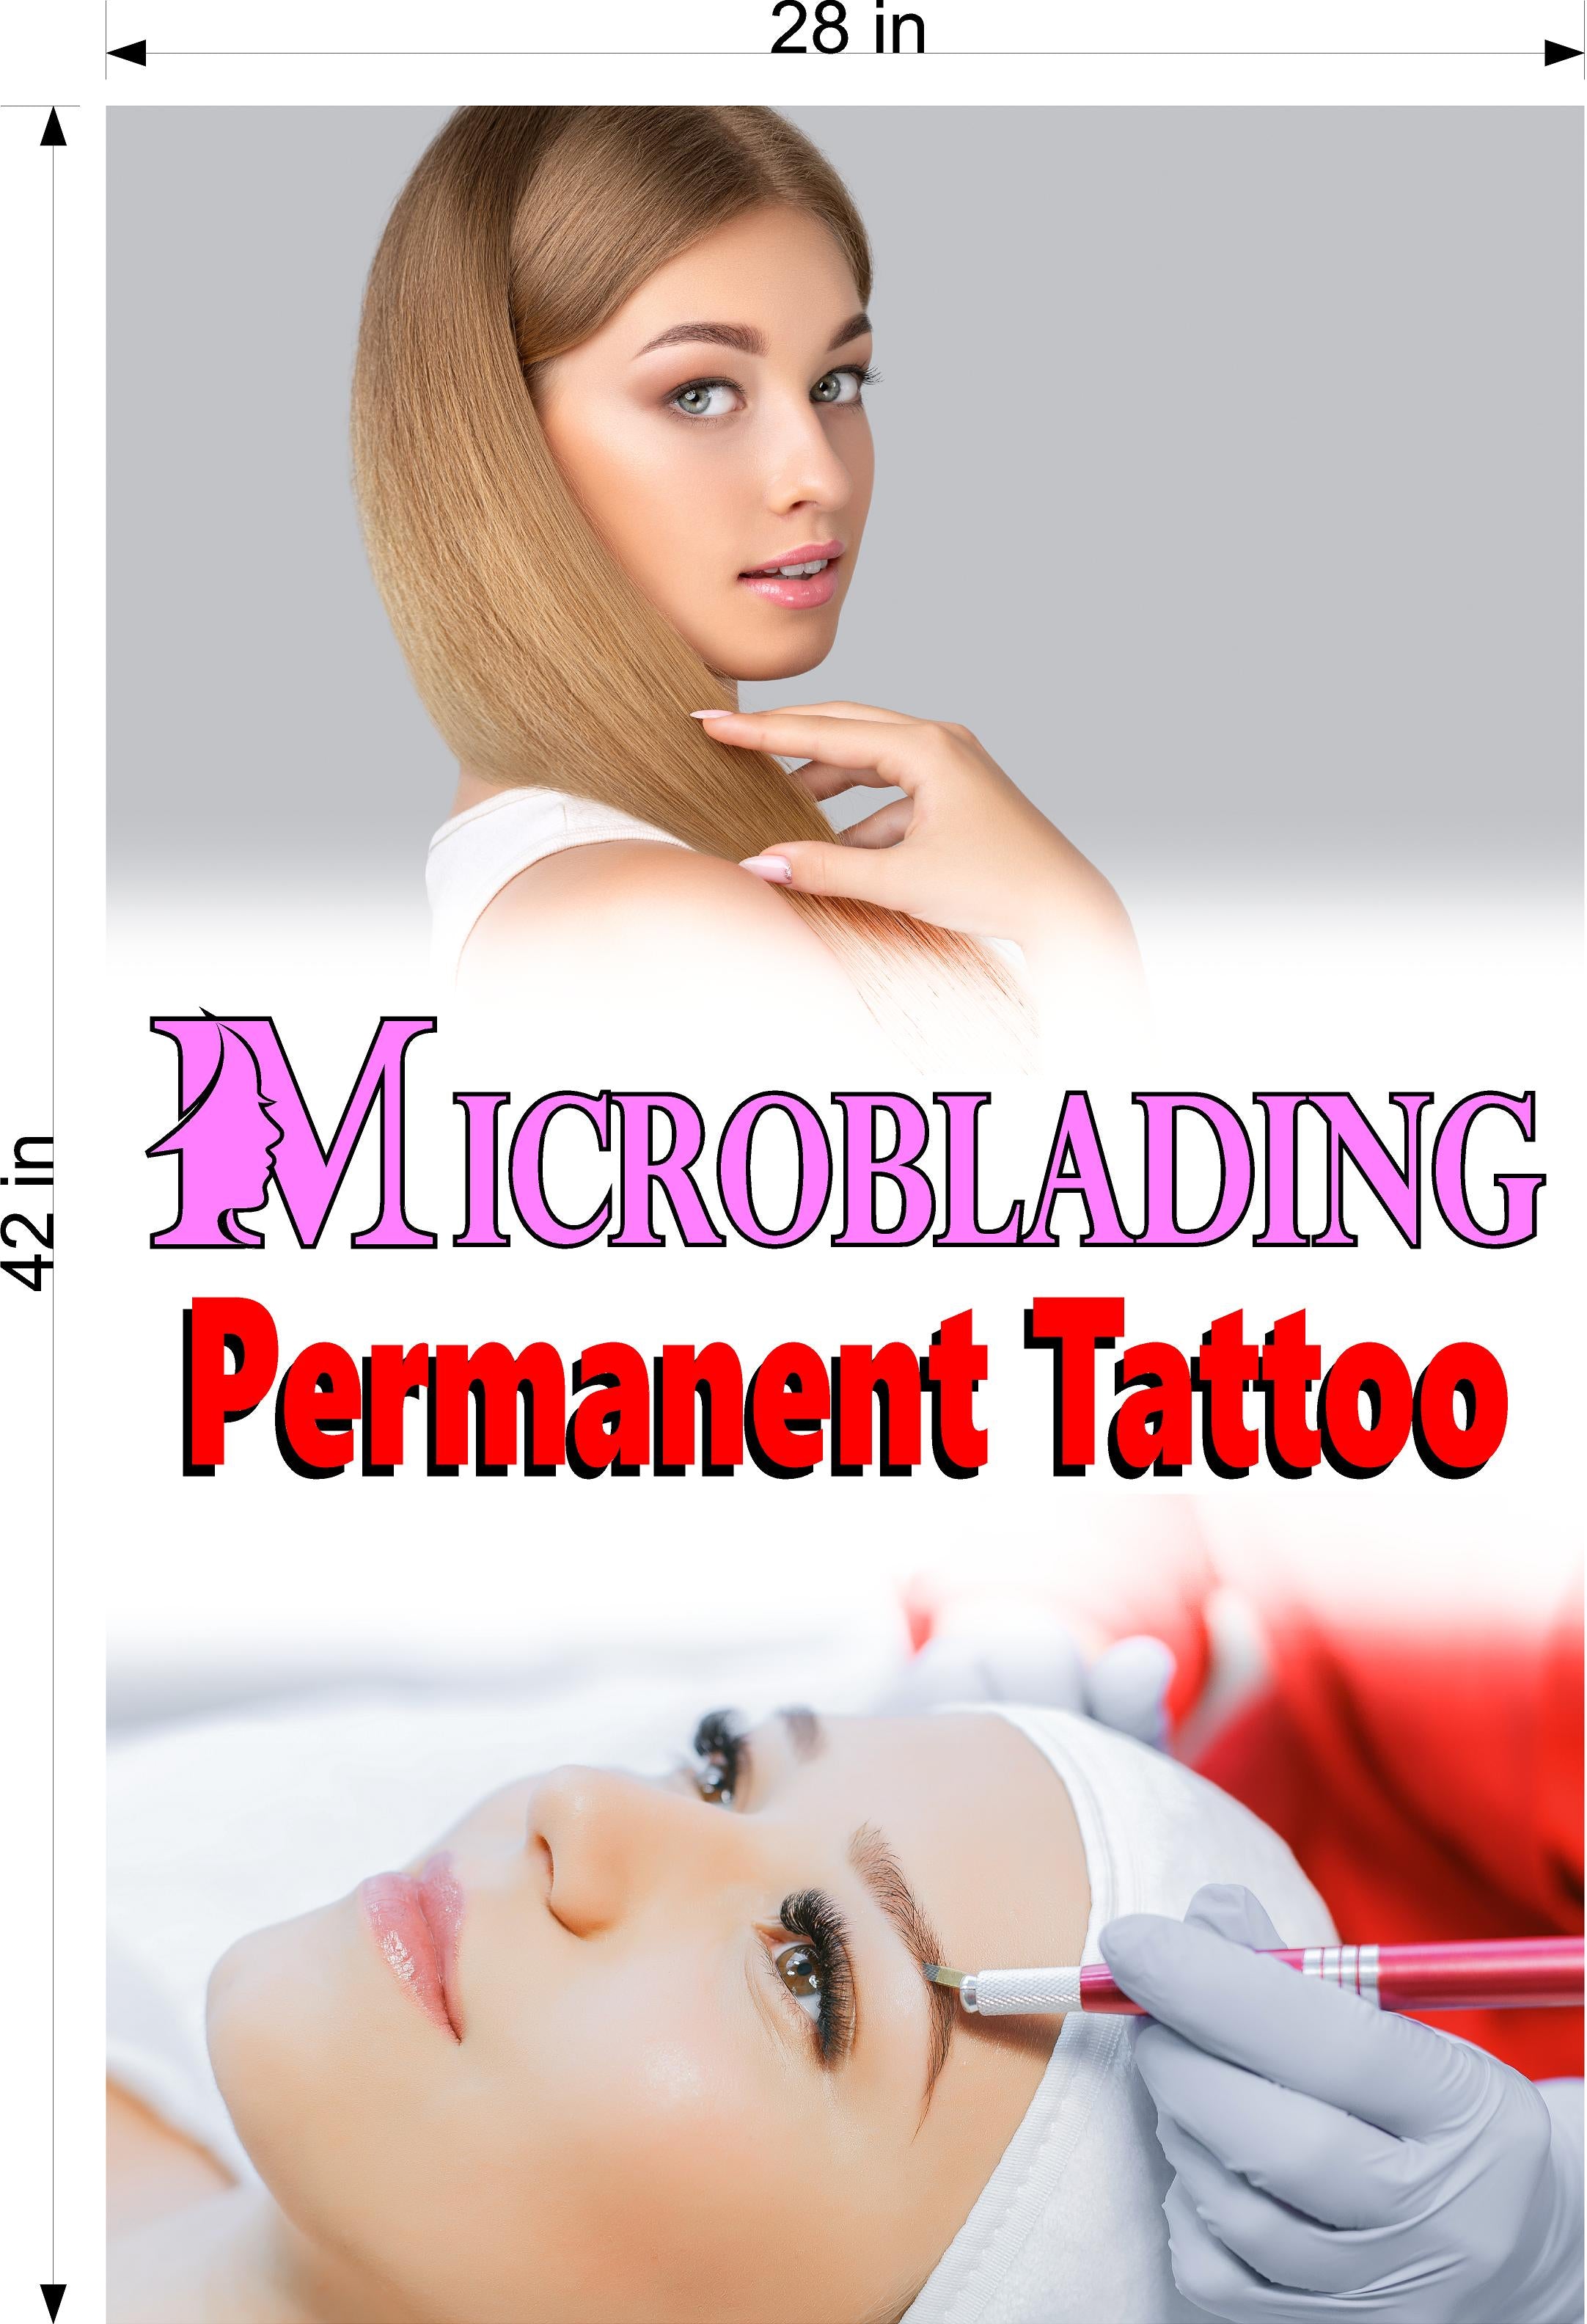 Microblading 14 Wallpaper Fabric Poster with Adhesive Backing Wall Interior Services Permanent Makeup Tattoo Vertical